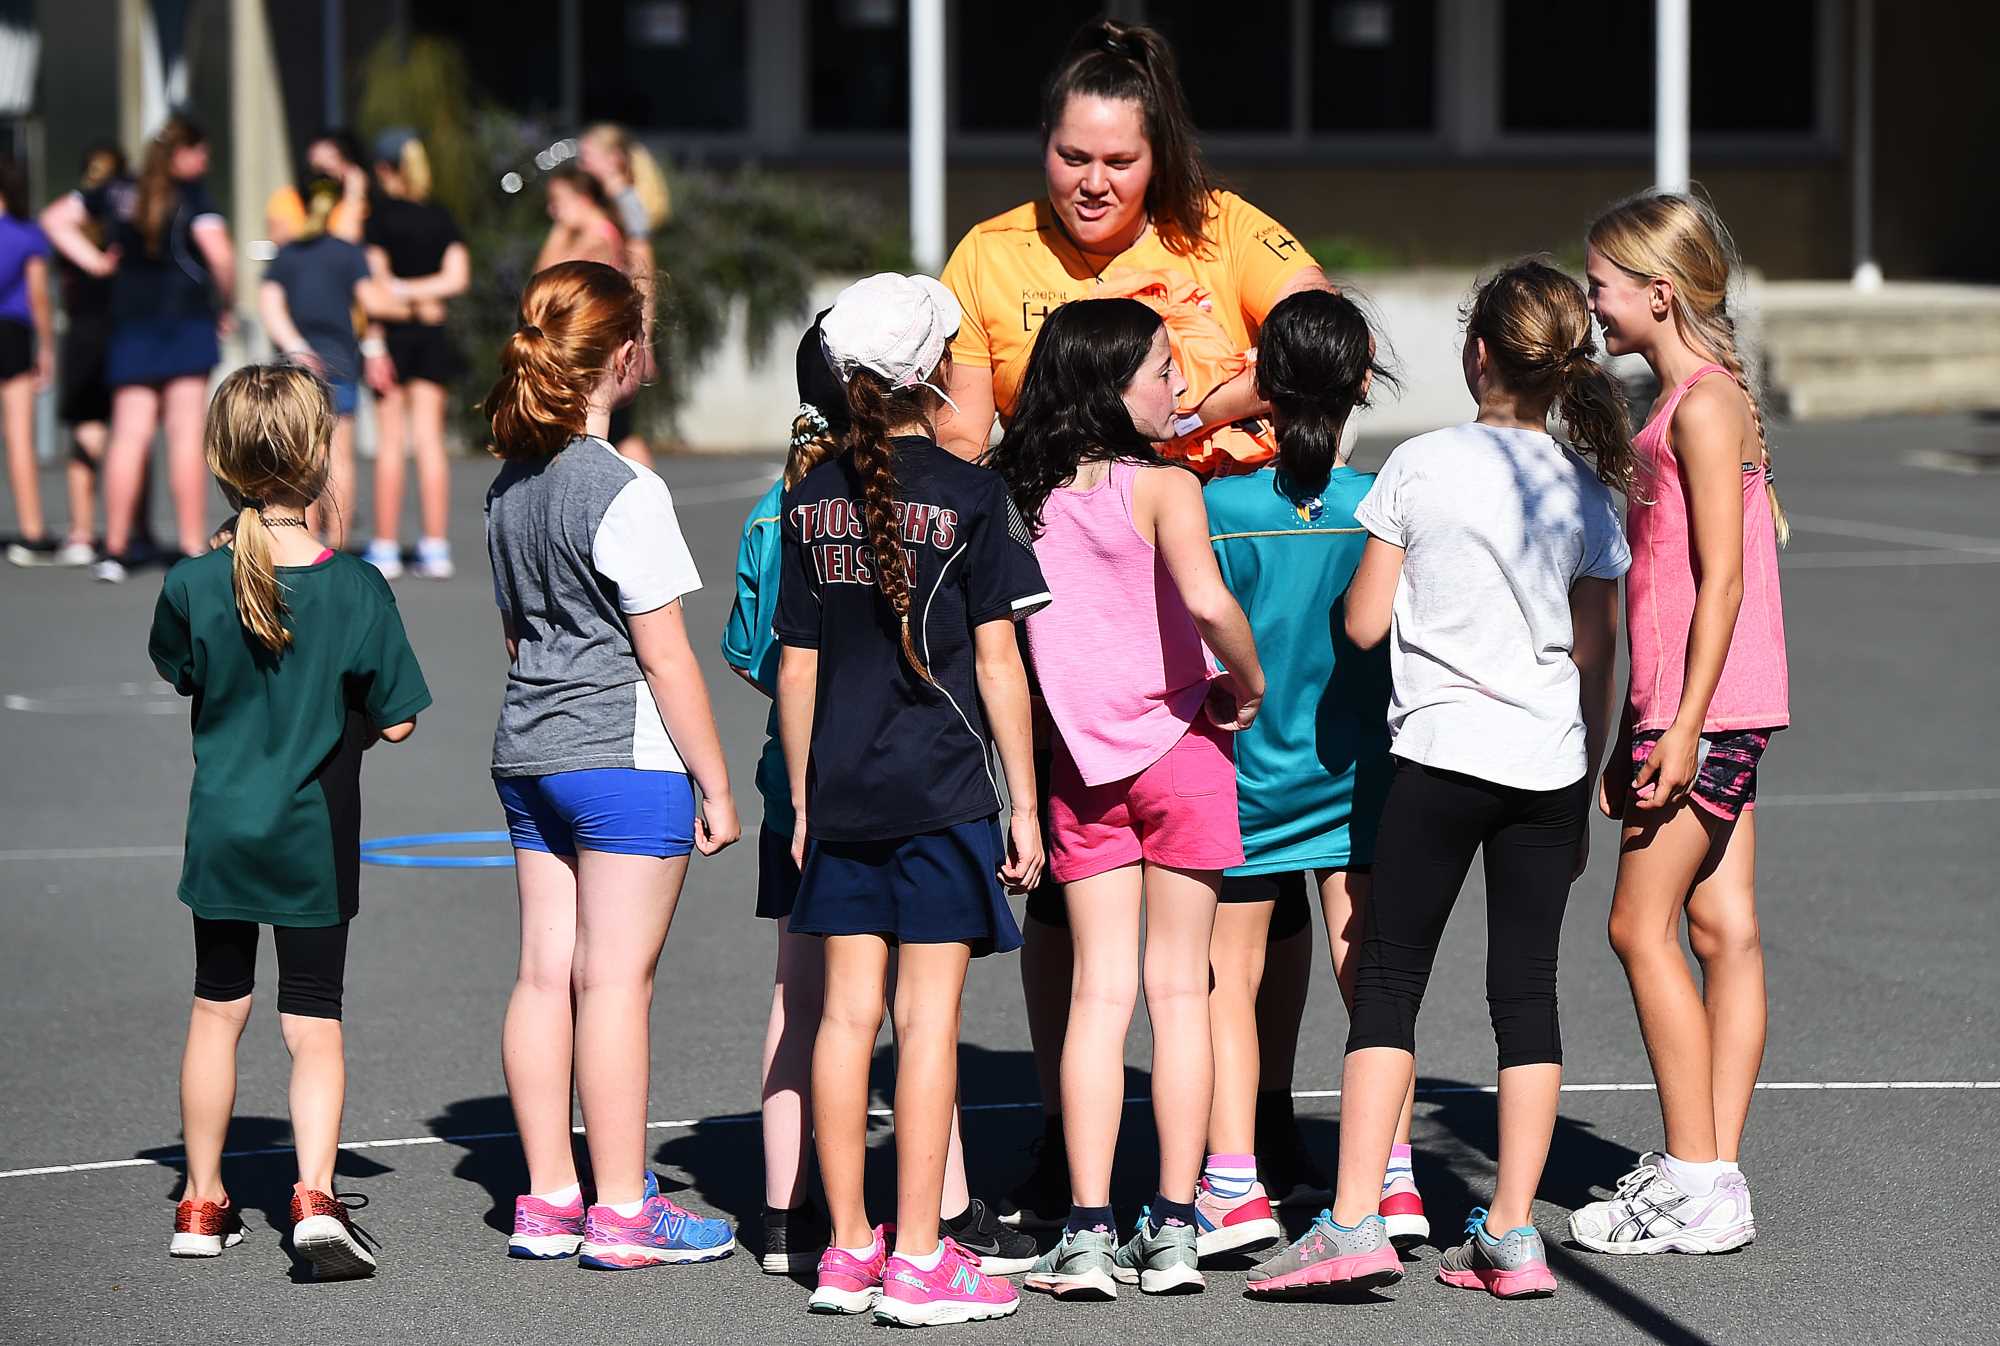 NELSON, NEW ZEALAND - FEBRUARY 13: Netball at Saxton, Stoke, New Zealand. Tuesday 13 February 2018. (Photo by Chris Symes/Shuttersport Limited)